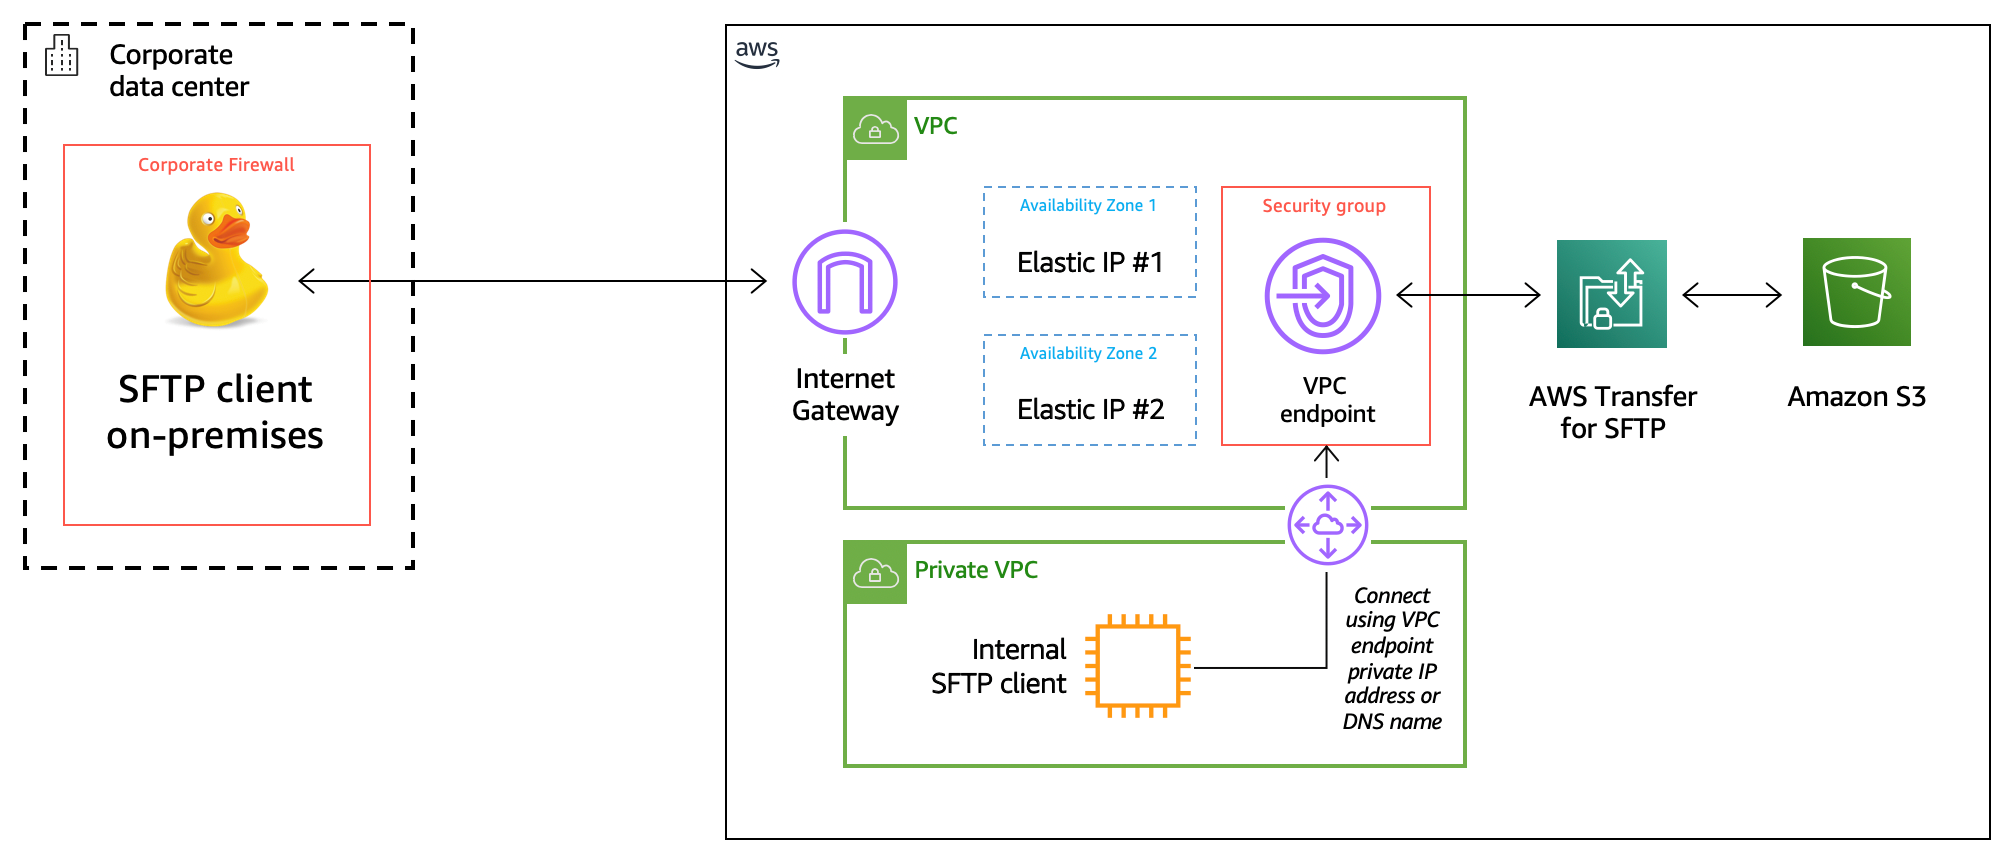 This diagram shows the key components that you use to build a secure AWS SFTP server and make it available to SFTP clients over the internet.